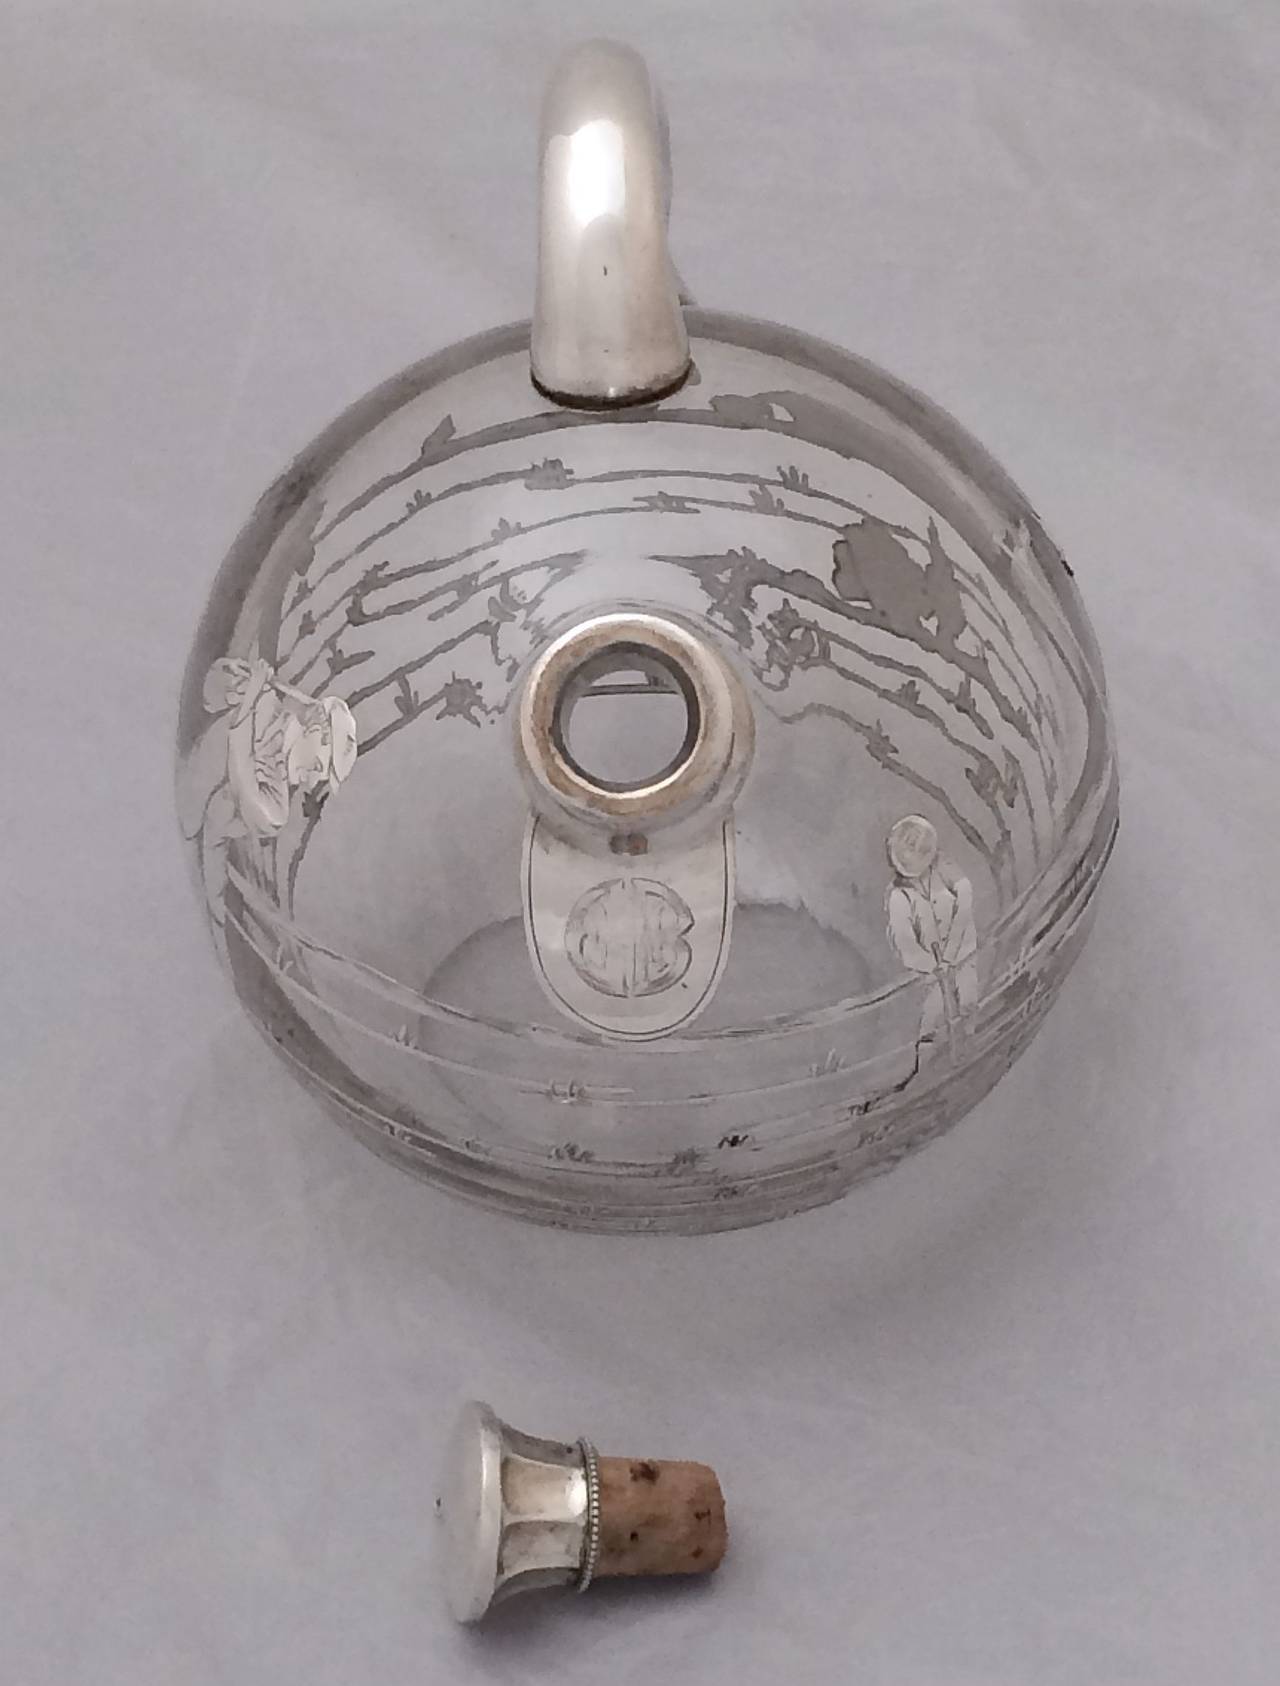 20th Century Silver Overlay Spirits Decanter with Golfers